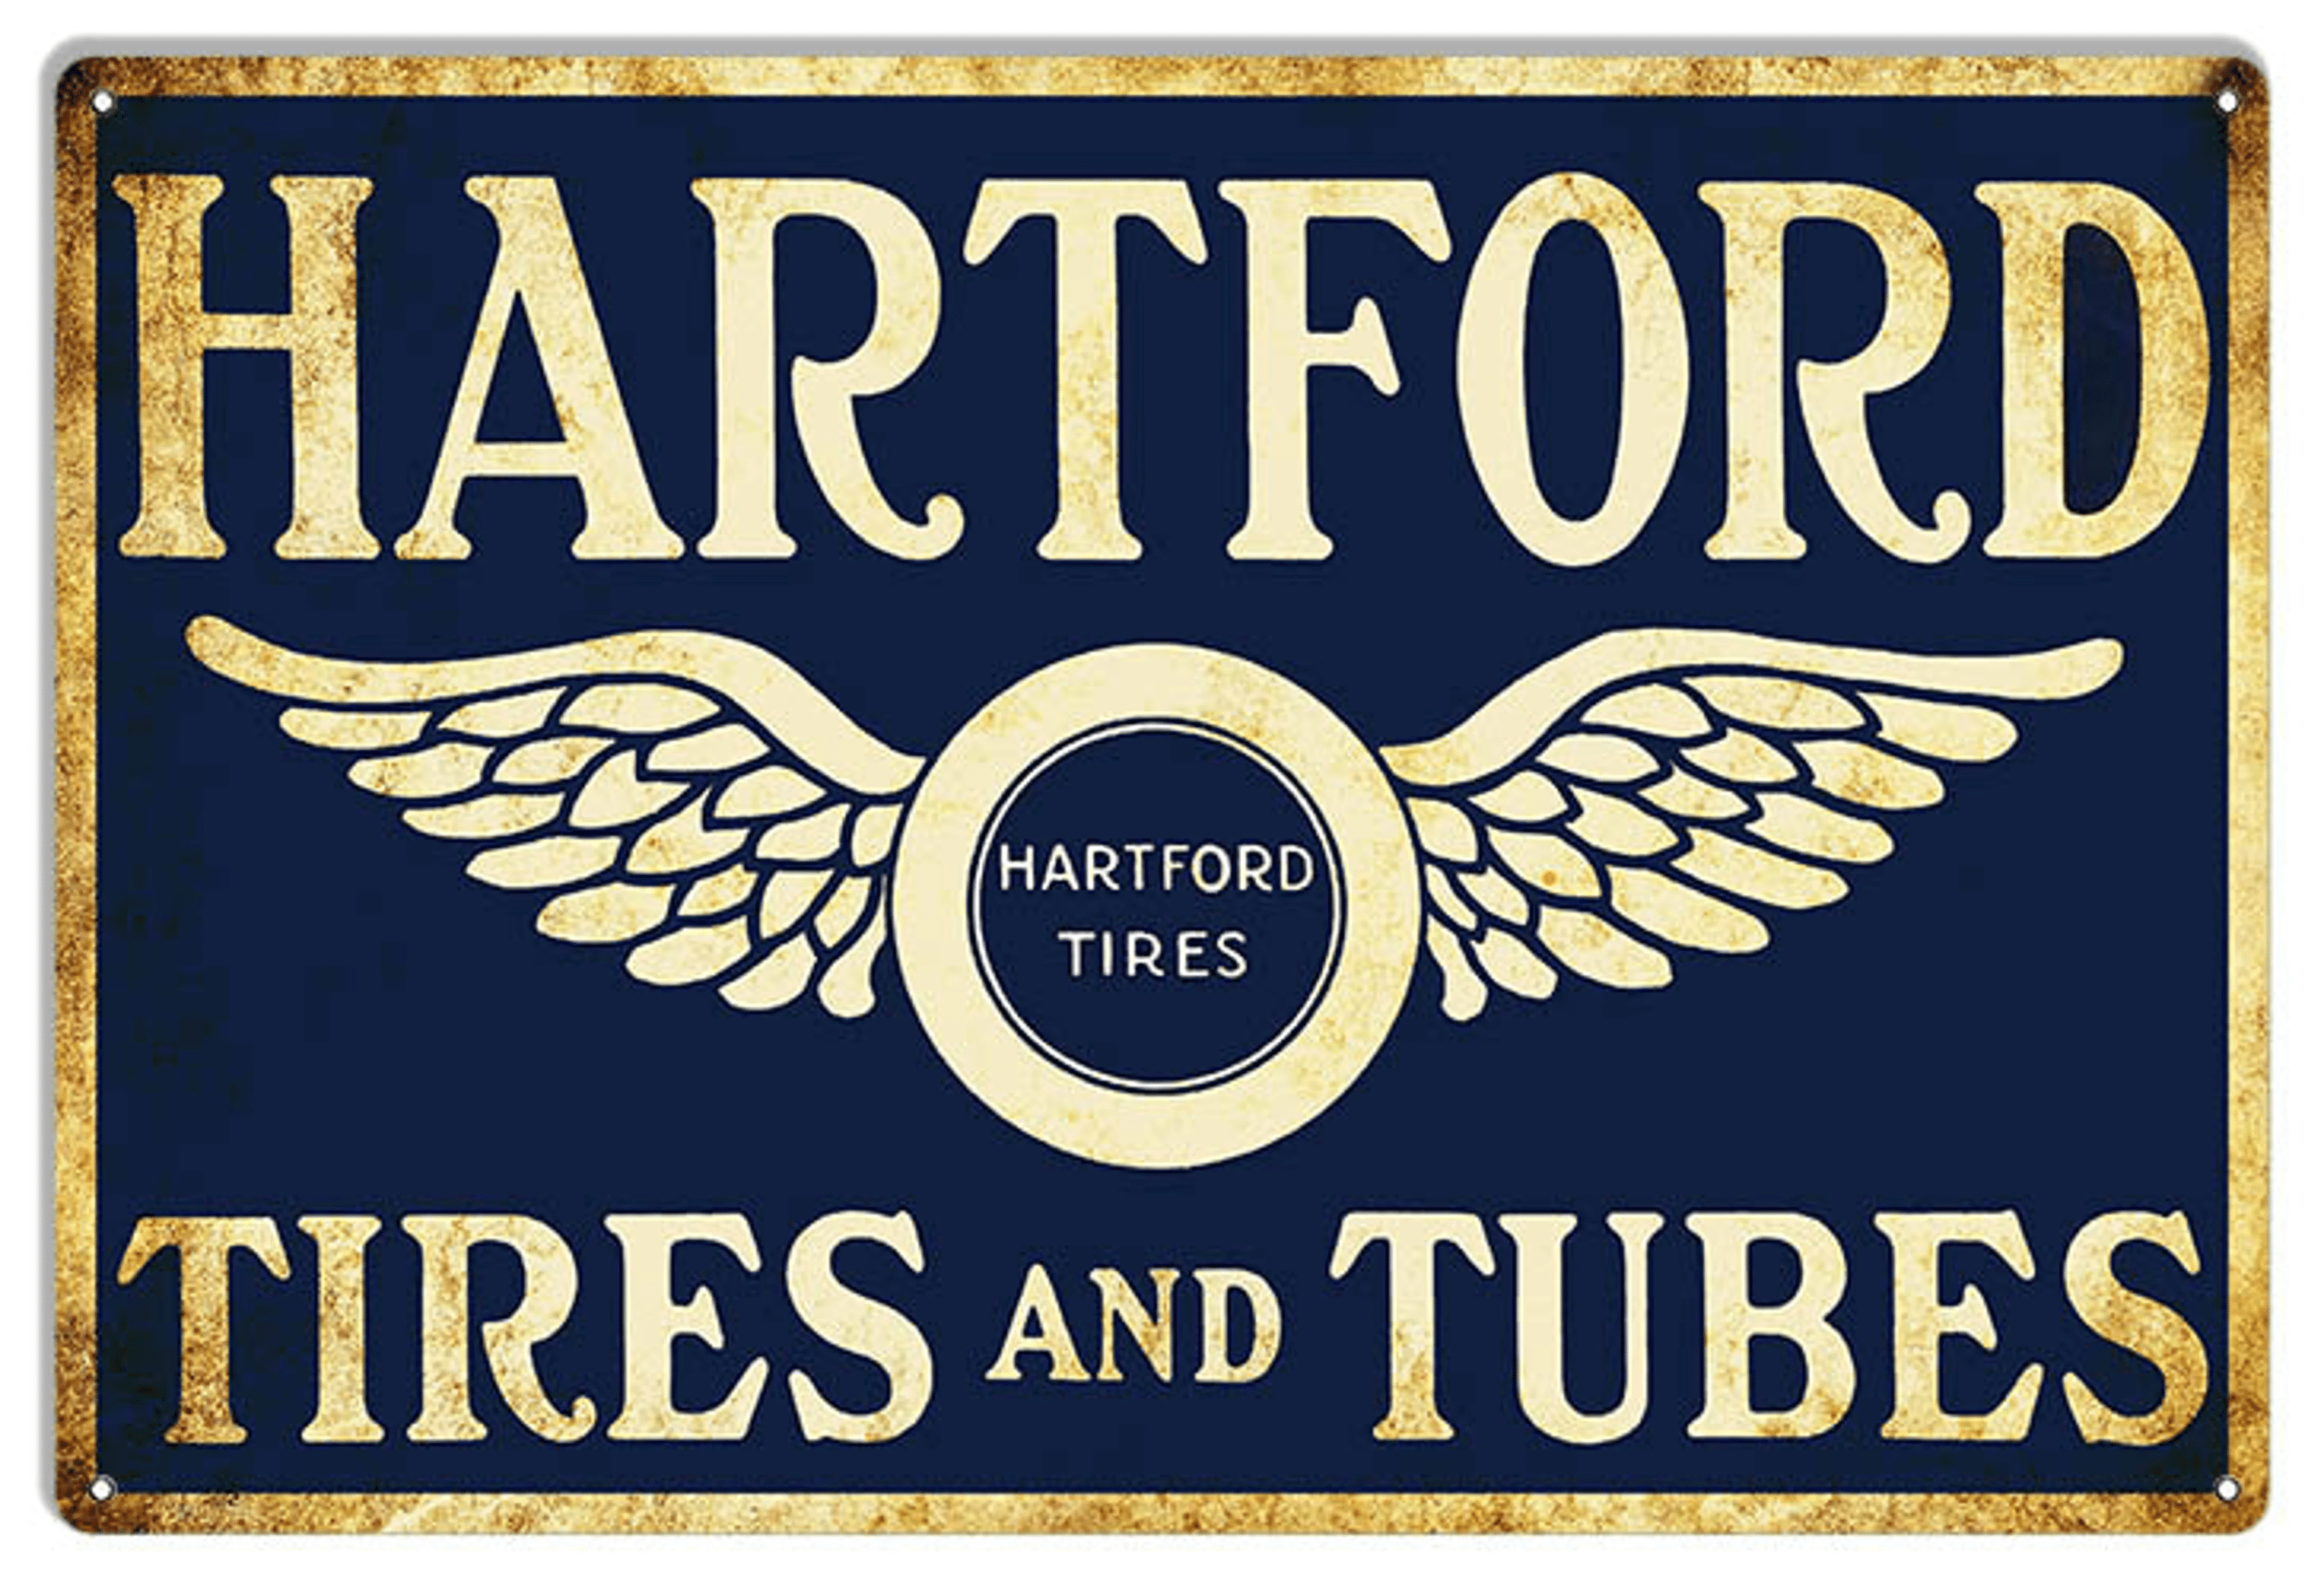 Hartford Tires And Tubes Metal Sign 3 Sizes Available Aged OR New Style Vintage Style Retro Garage Art RG